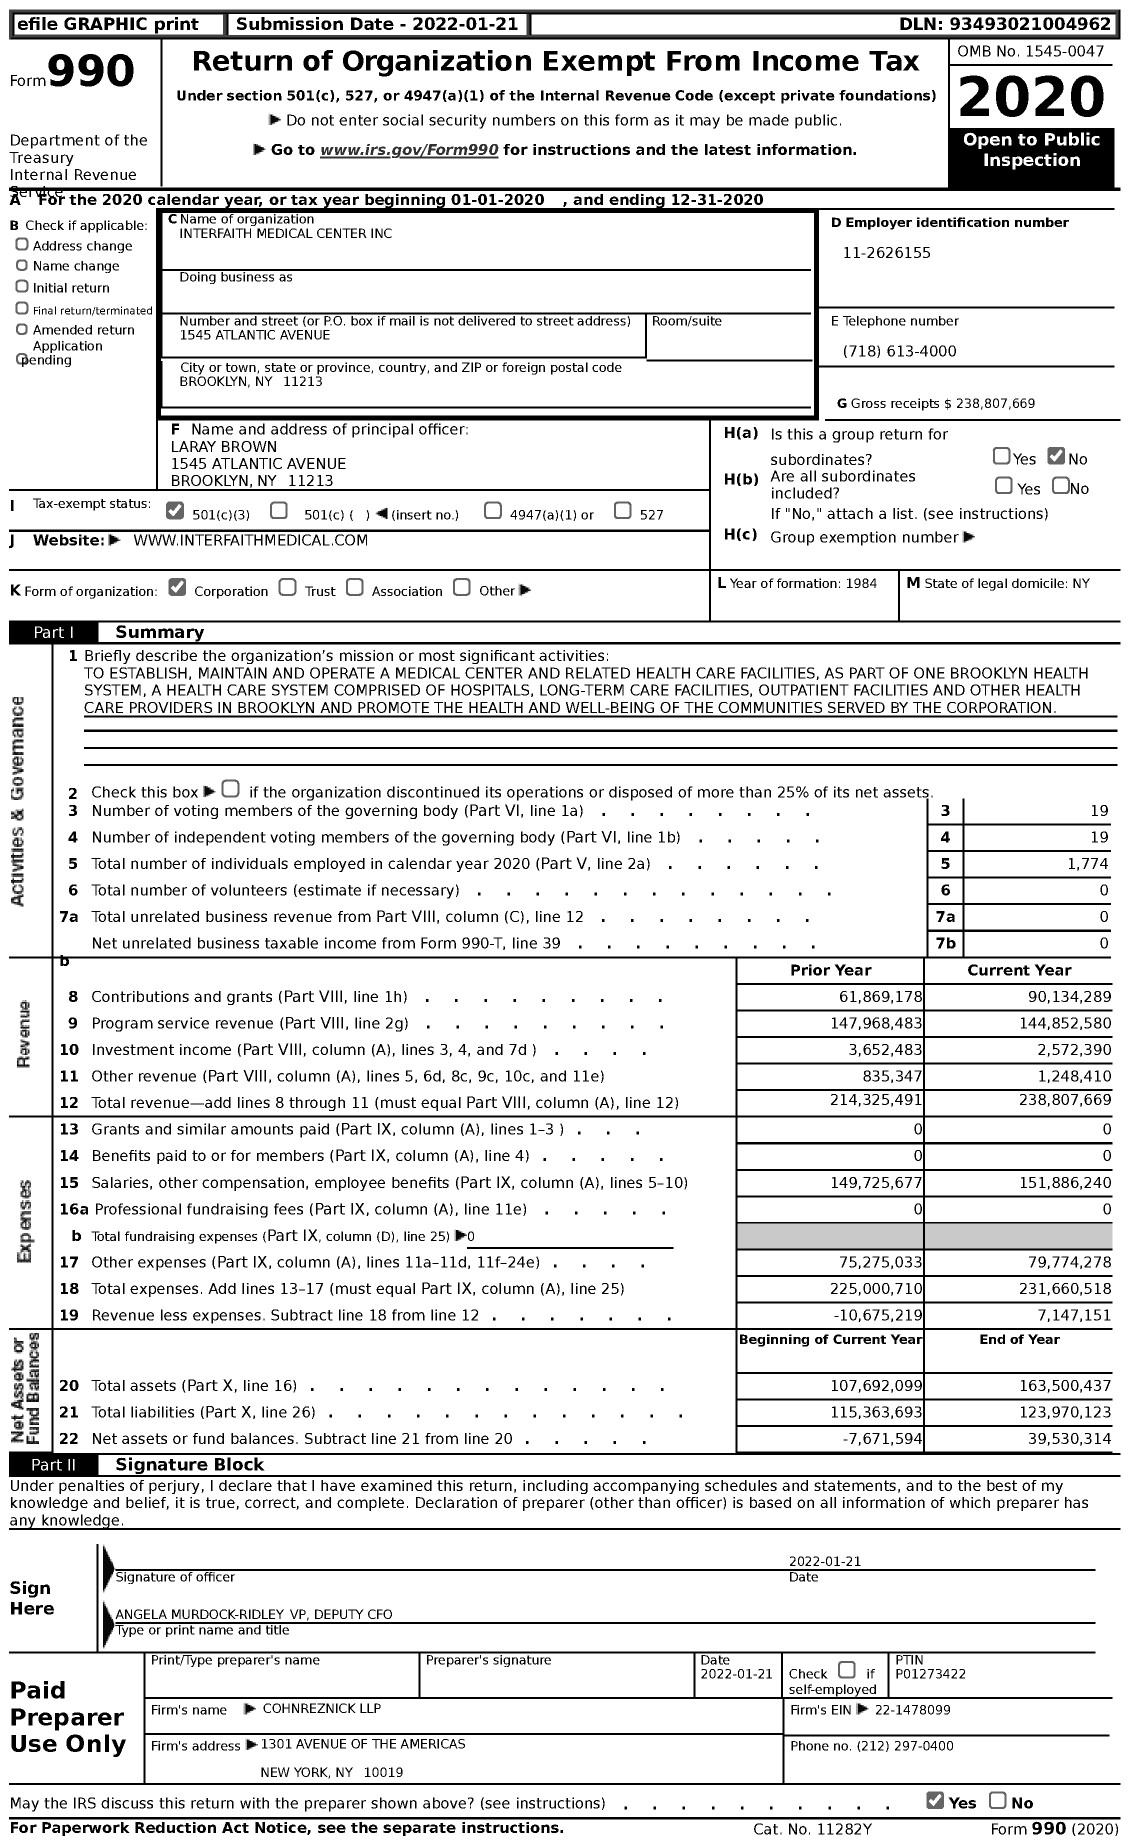 Image of first page of 2020 Form 990 for Interfaith Medical Center (IMC)